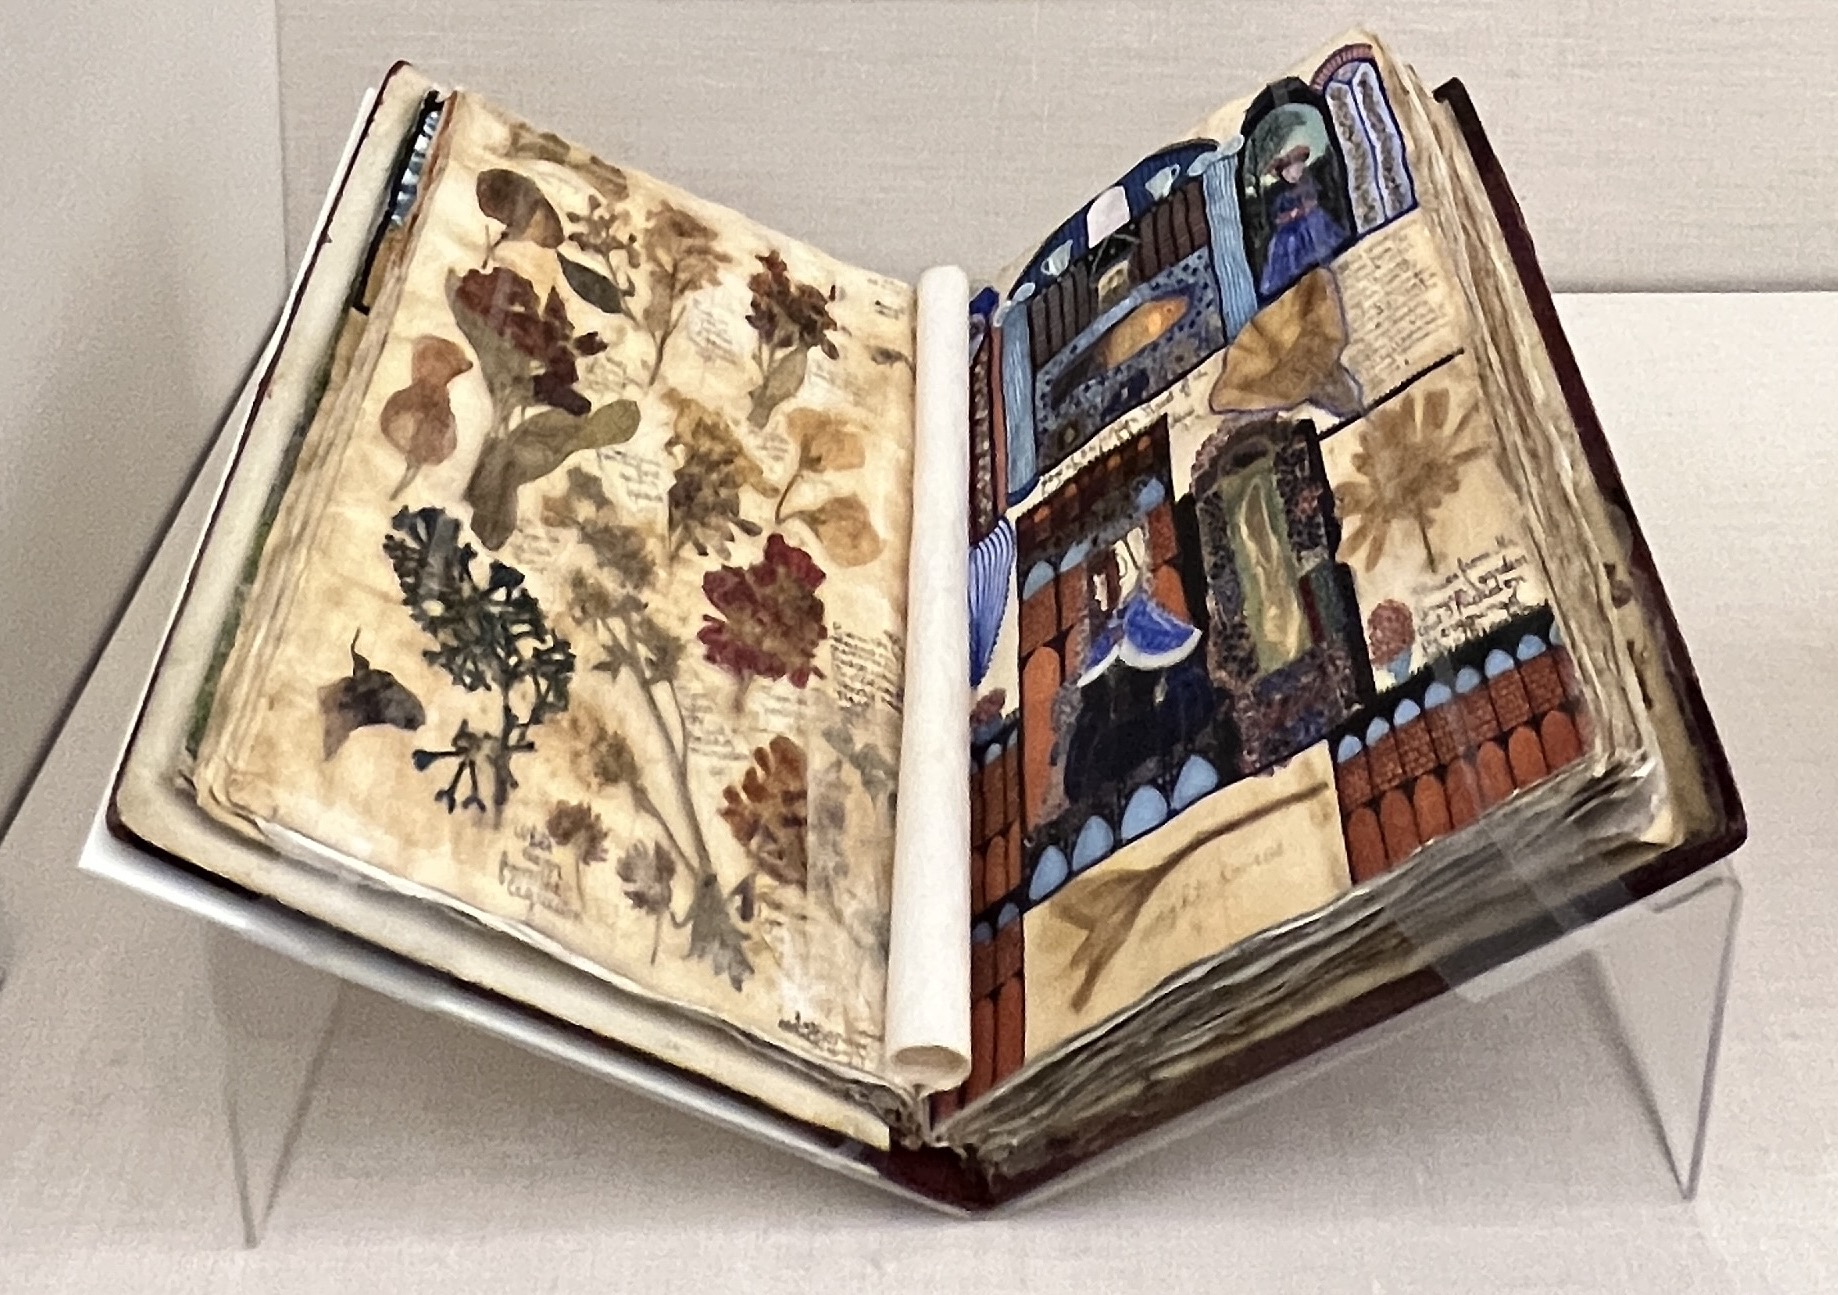 A book containing pressed flowers.